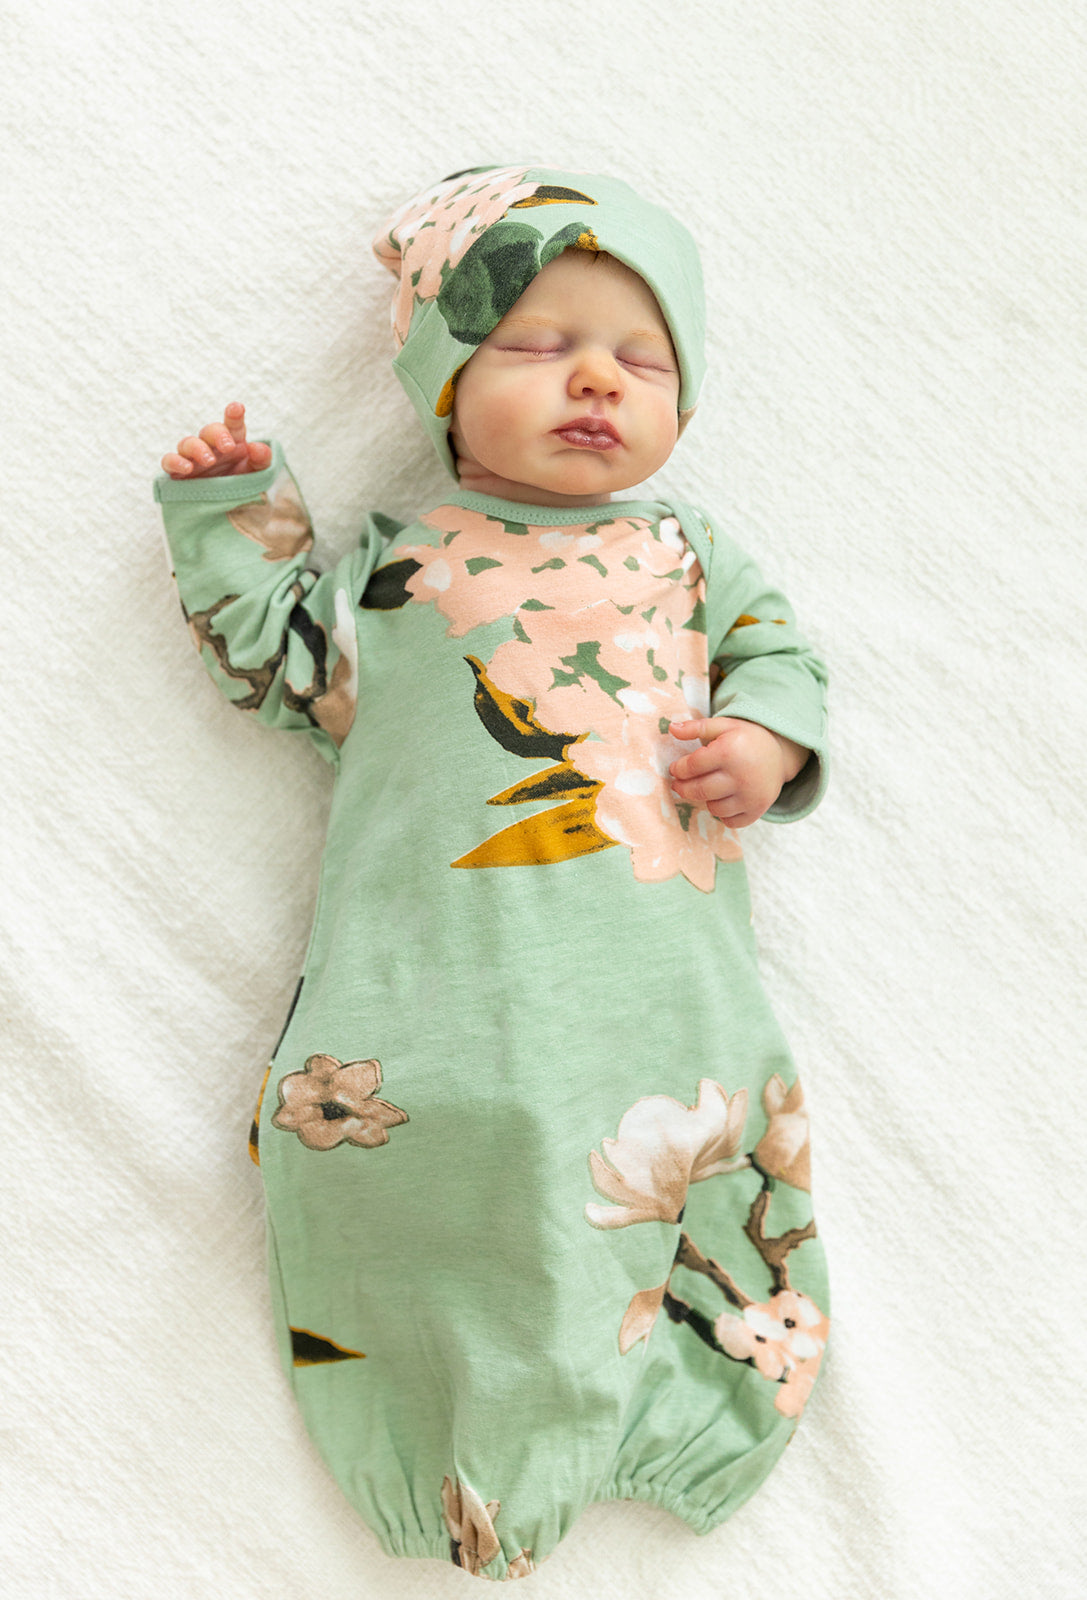 Newborn baby gown with elastic bottom and fold over mittens, perfect babies first outfit by Baby Be Mine Maternity